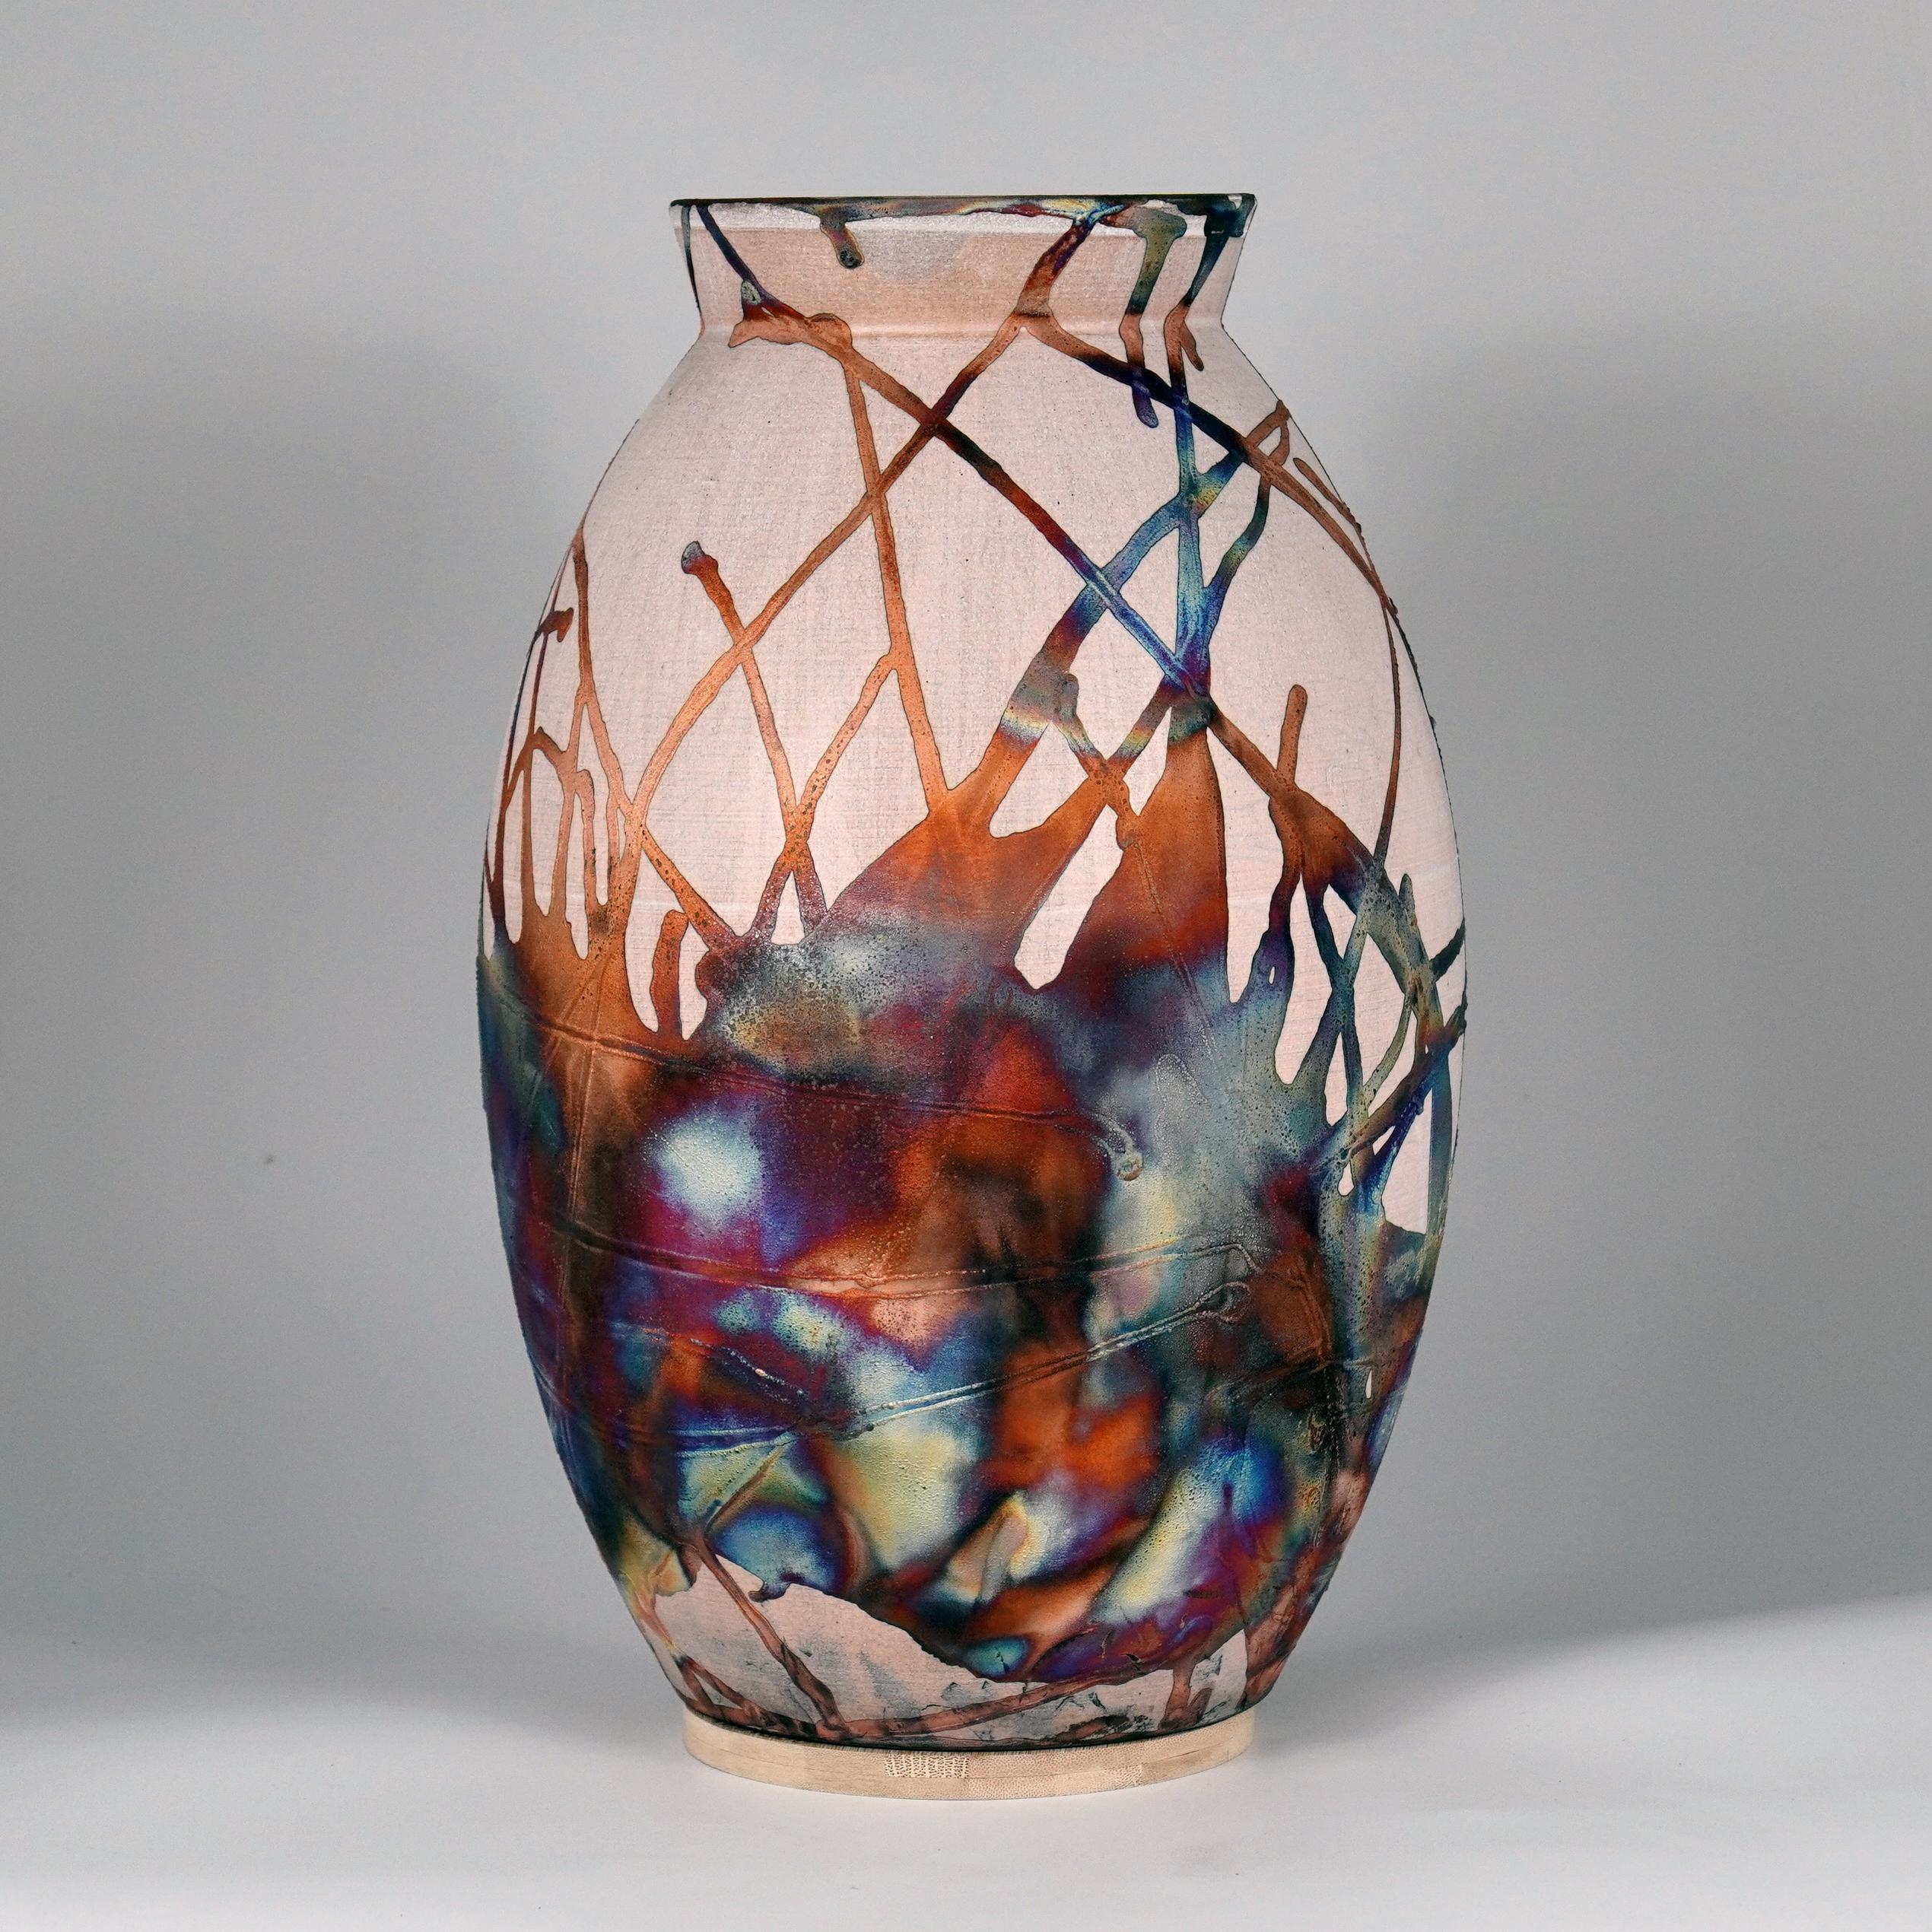 A mesmerizing sight to behold as soon as the rainbow-like patinas catch your eye. The Oval XL Vase is a tall, teardrop-shaped design best for adding a touch of elegance and intrigue to an interior space. Made using the Raku technique, it easily